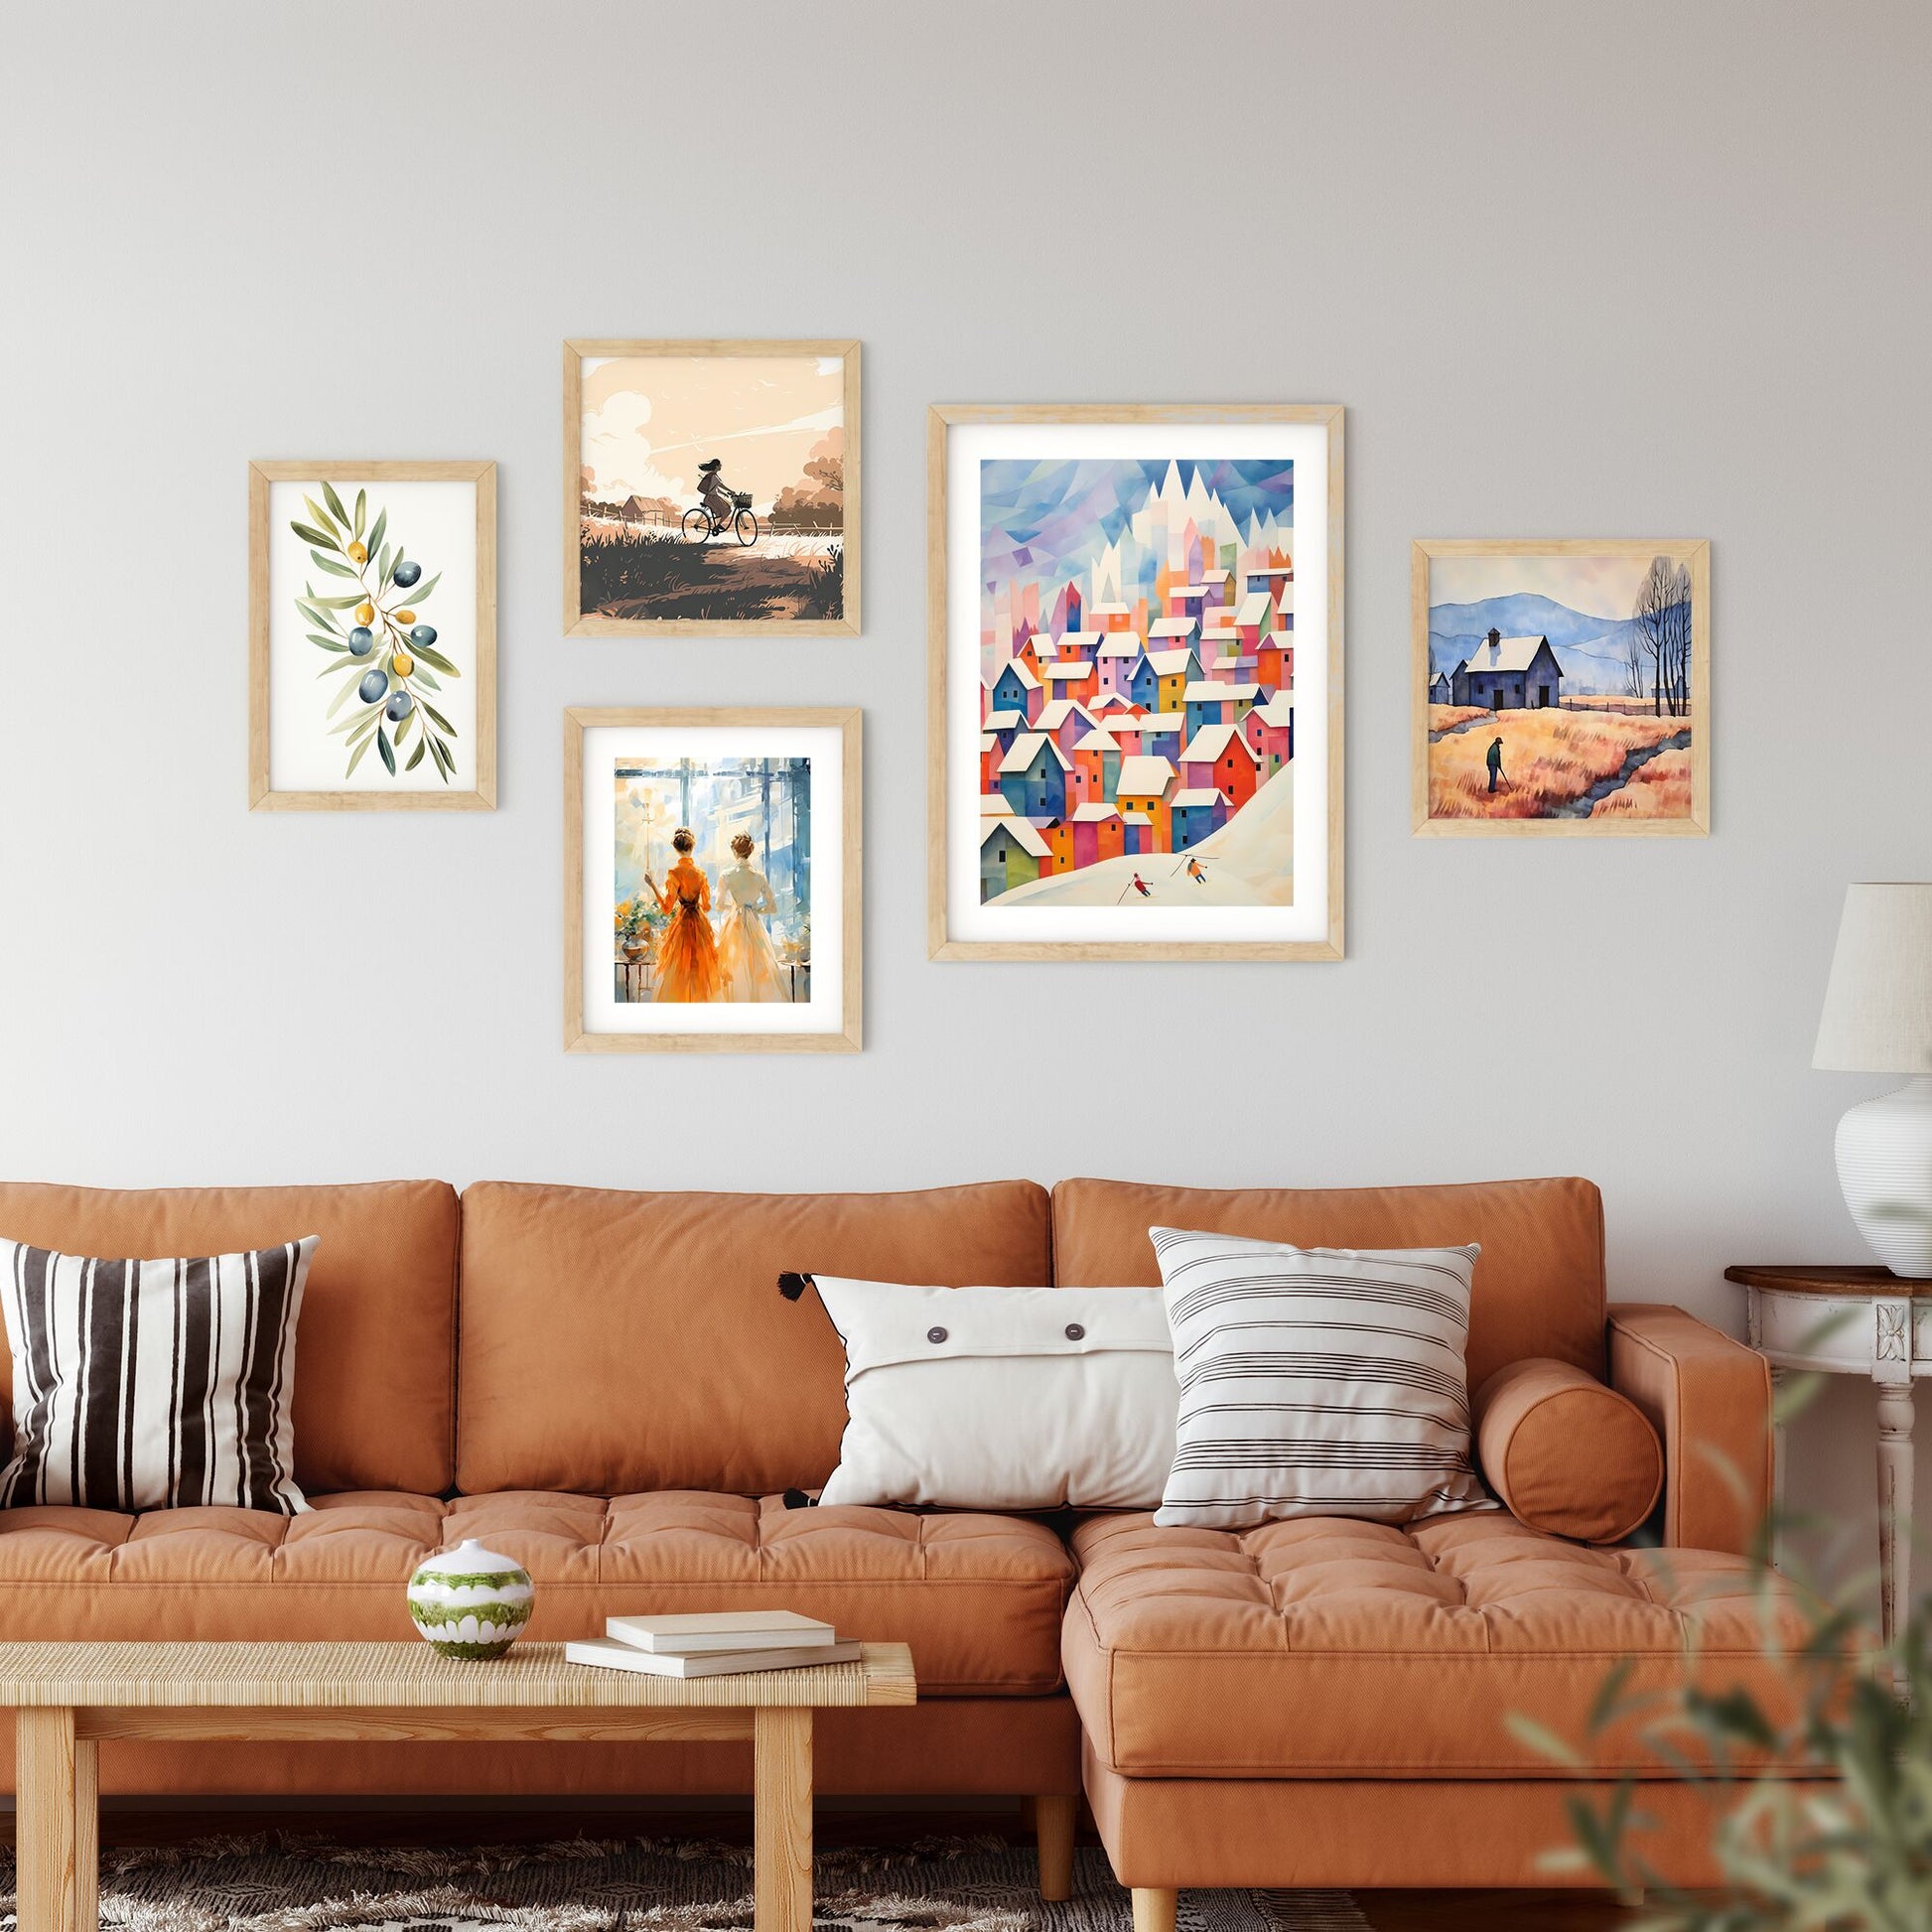 A Painting Of A Group Of Colorful Houses With Snow Art Print Default Title